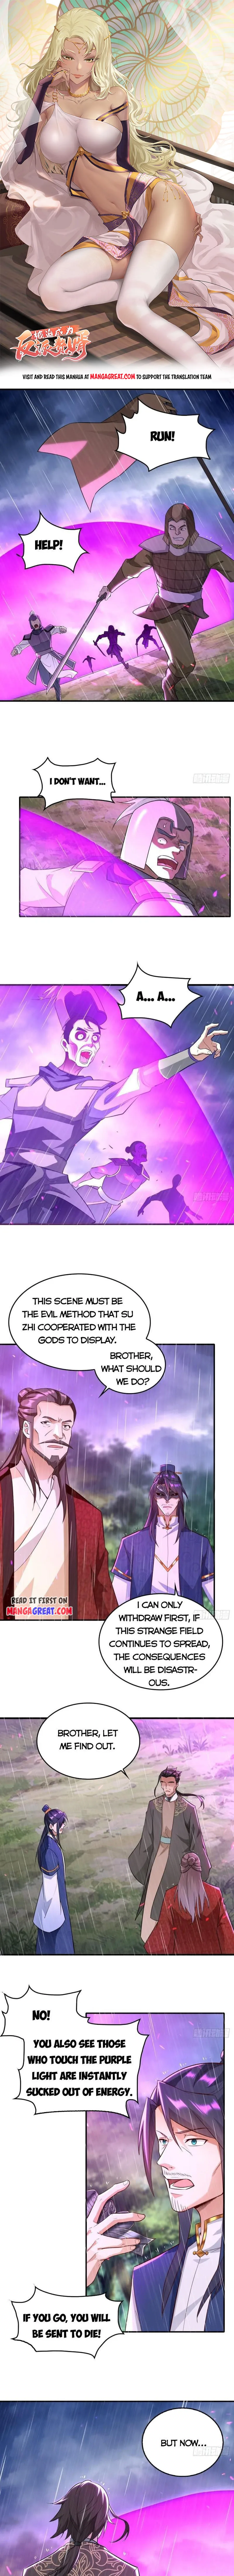 Forced To Become The Villain's Son-In-Law - Page 1